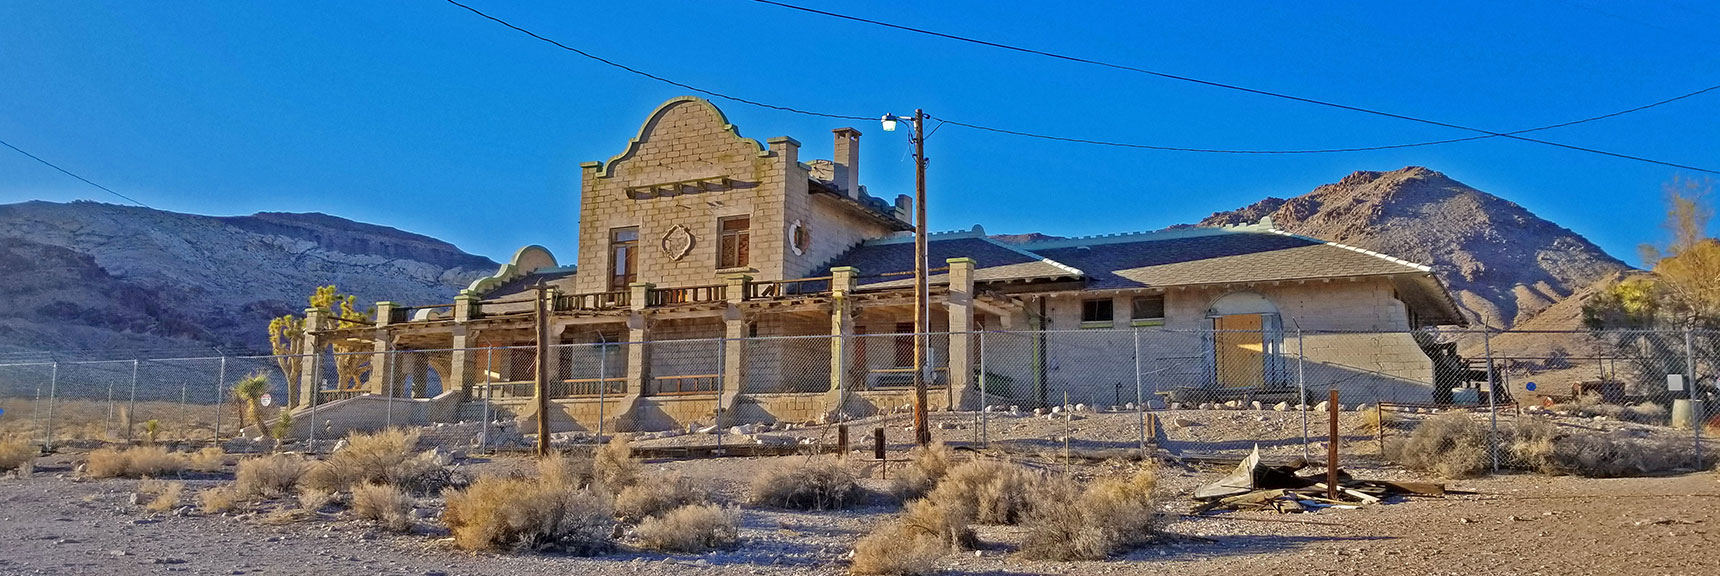 Train Depot - Recently a Casino, Bar and Souvenir Shop | Rhyolite Ghost Town | Death Valley Area, Nevada